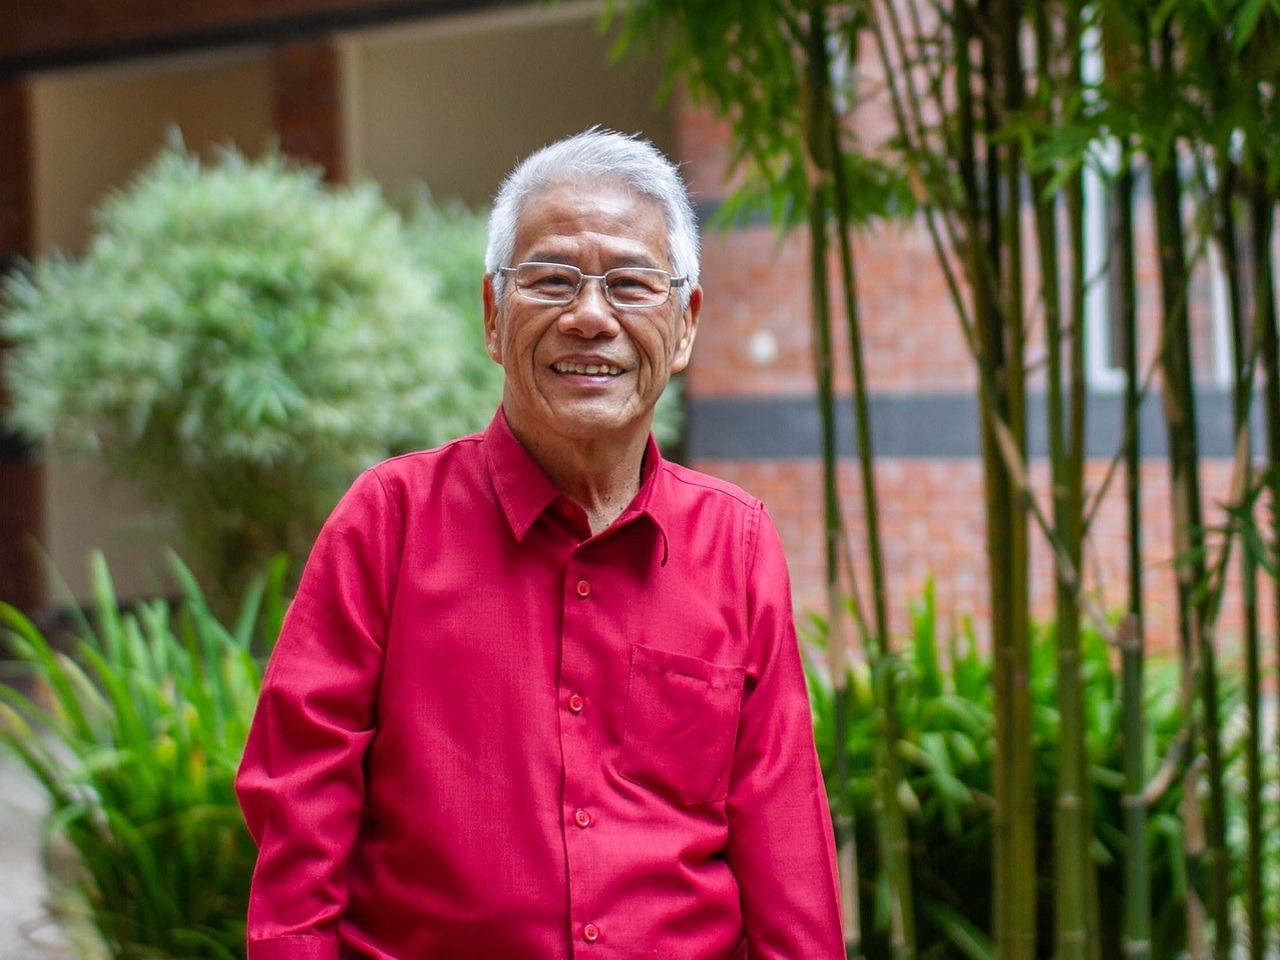 “I’m a very young 74 years of age. I’m a member of the Chartered Management Accountants and also their regional director for Southeast Asia. Previously, I was with Chevron Petroleum and Shell. Upon my retirement, a friend ask me, “Hey, Kwok Mow, why...